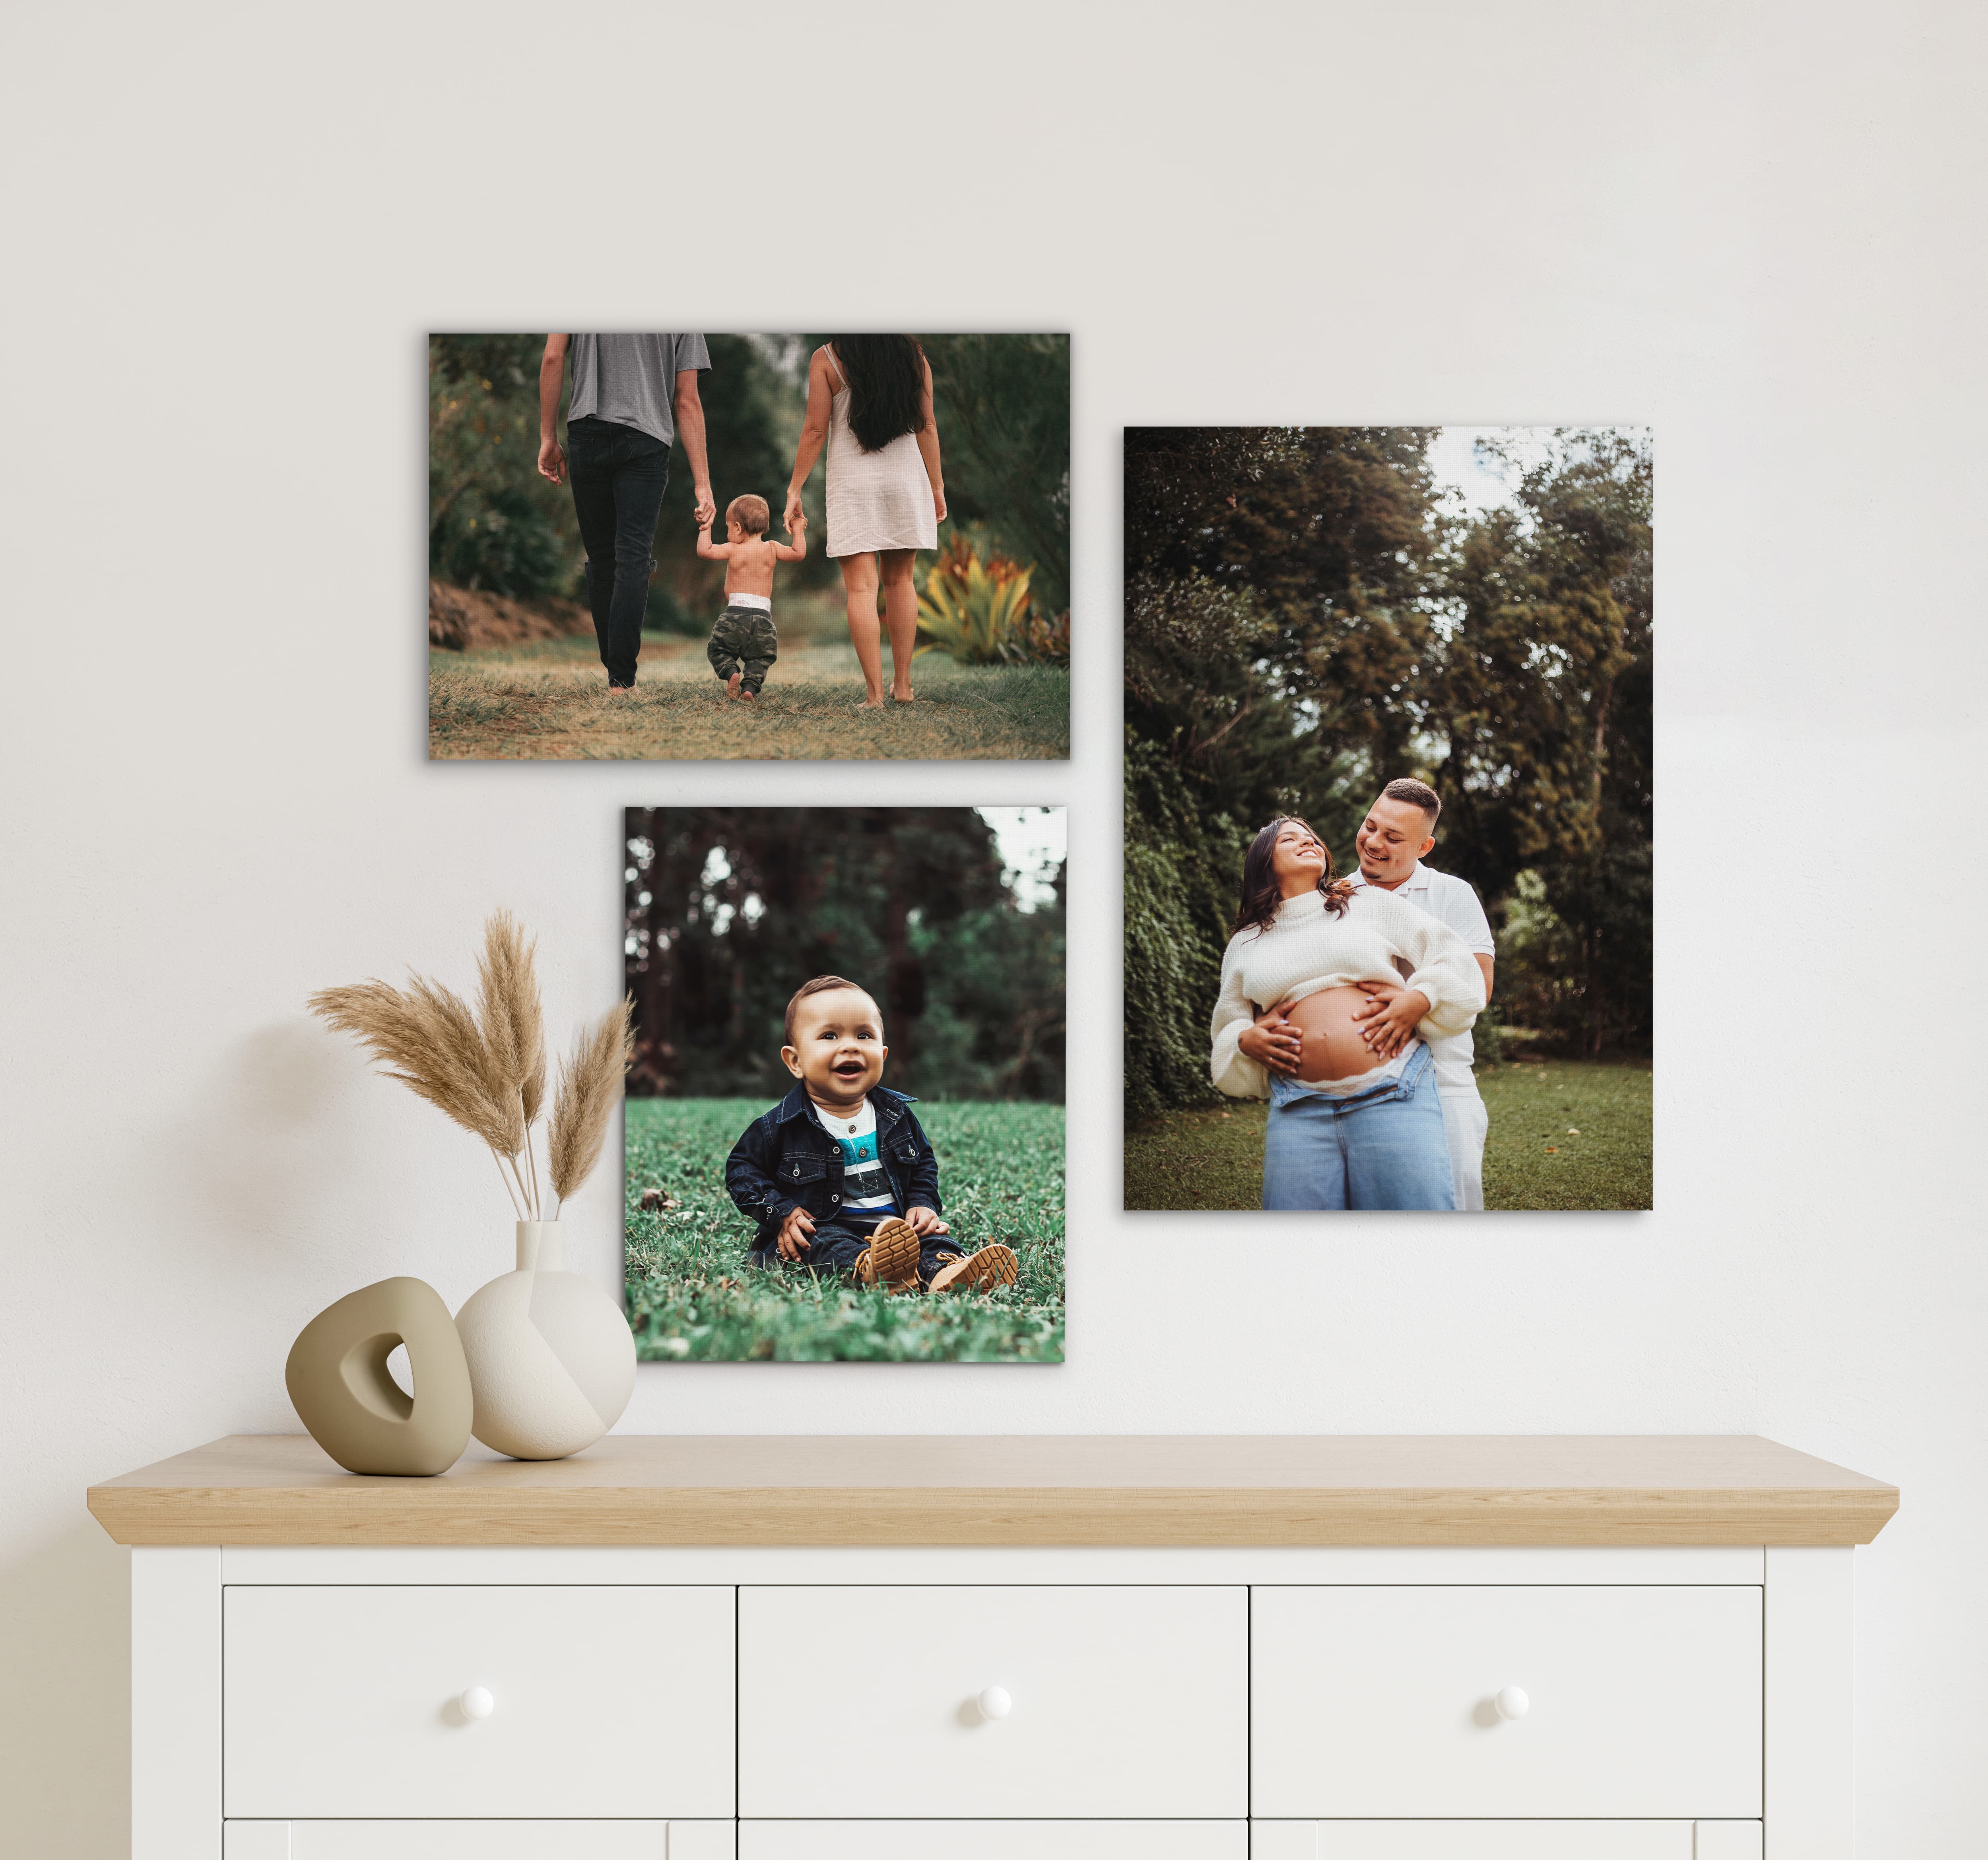 Gallery wall of canvas prints of family photoshoot.